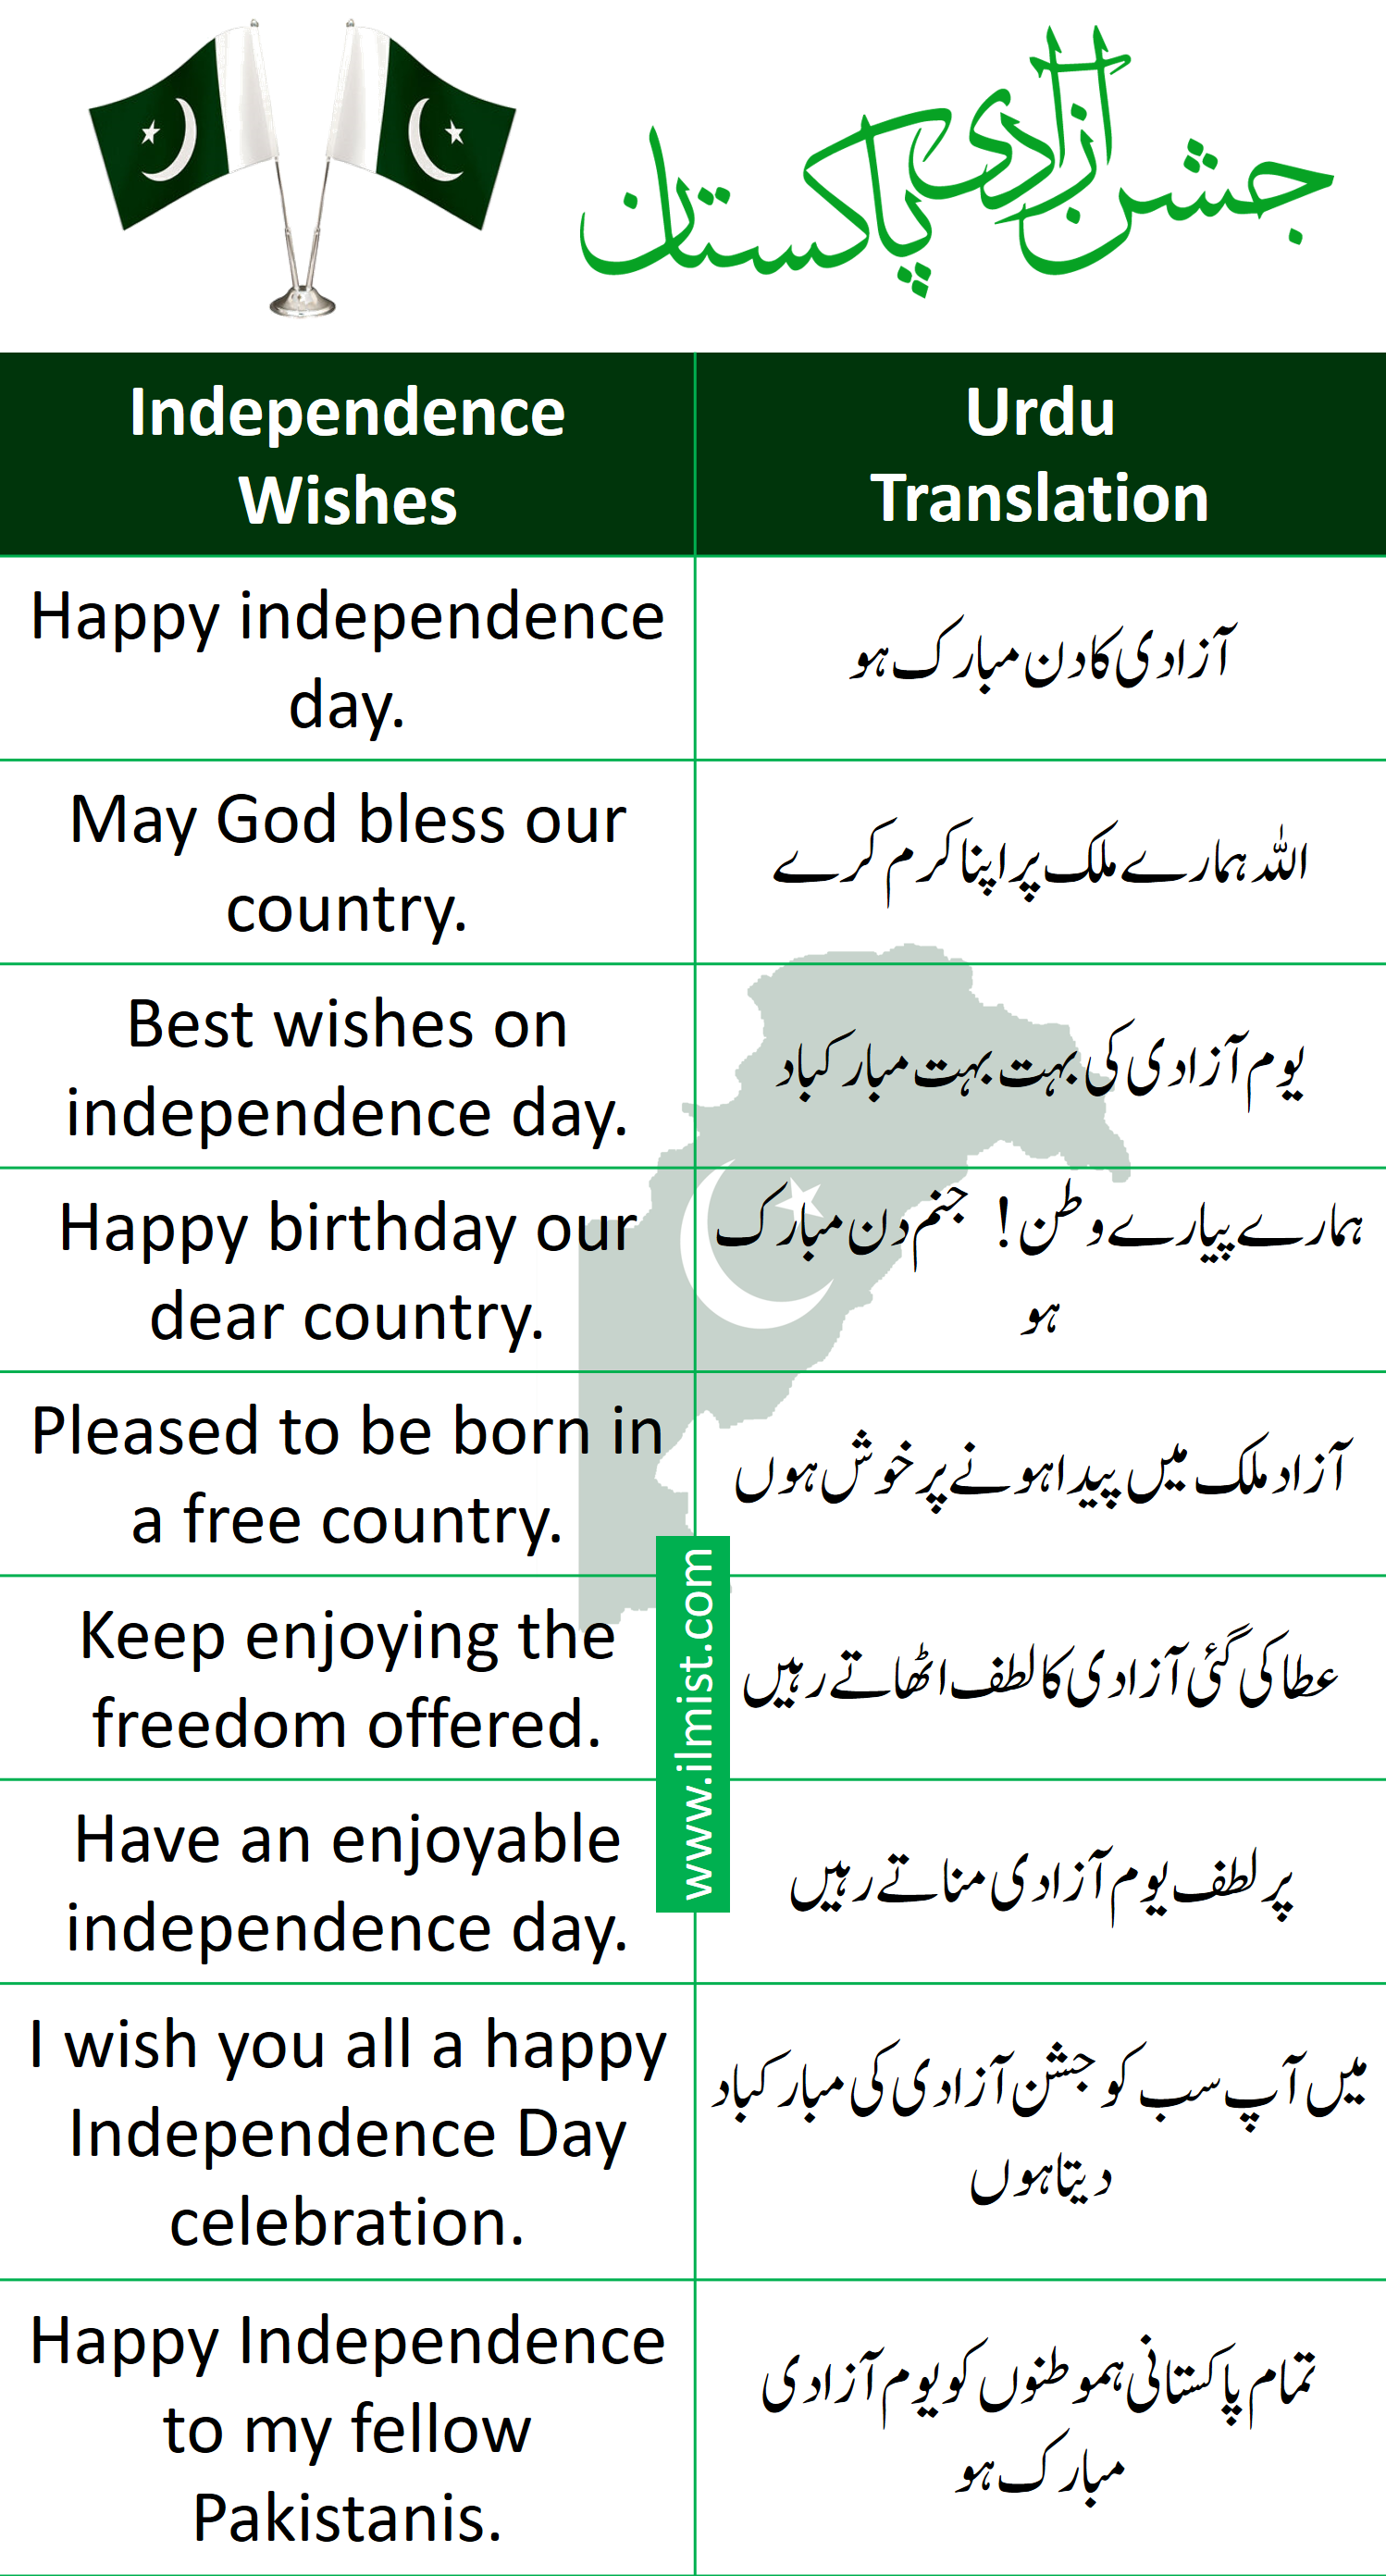 Independence Day Vocabulary & Sentences in Urdu and English